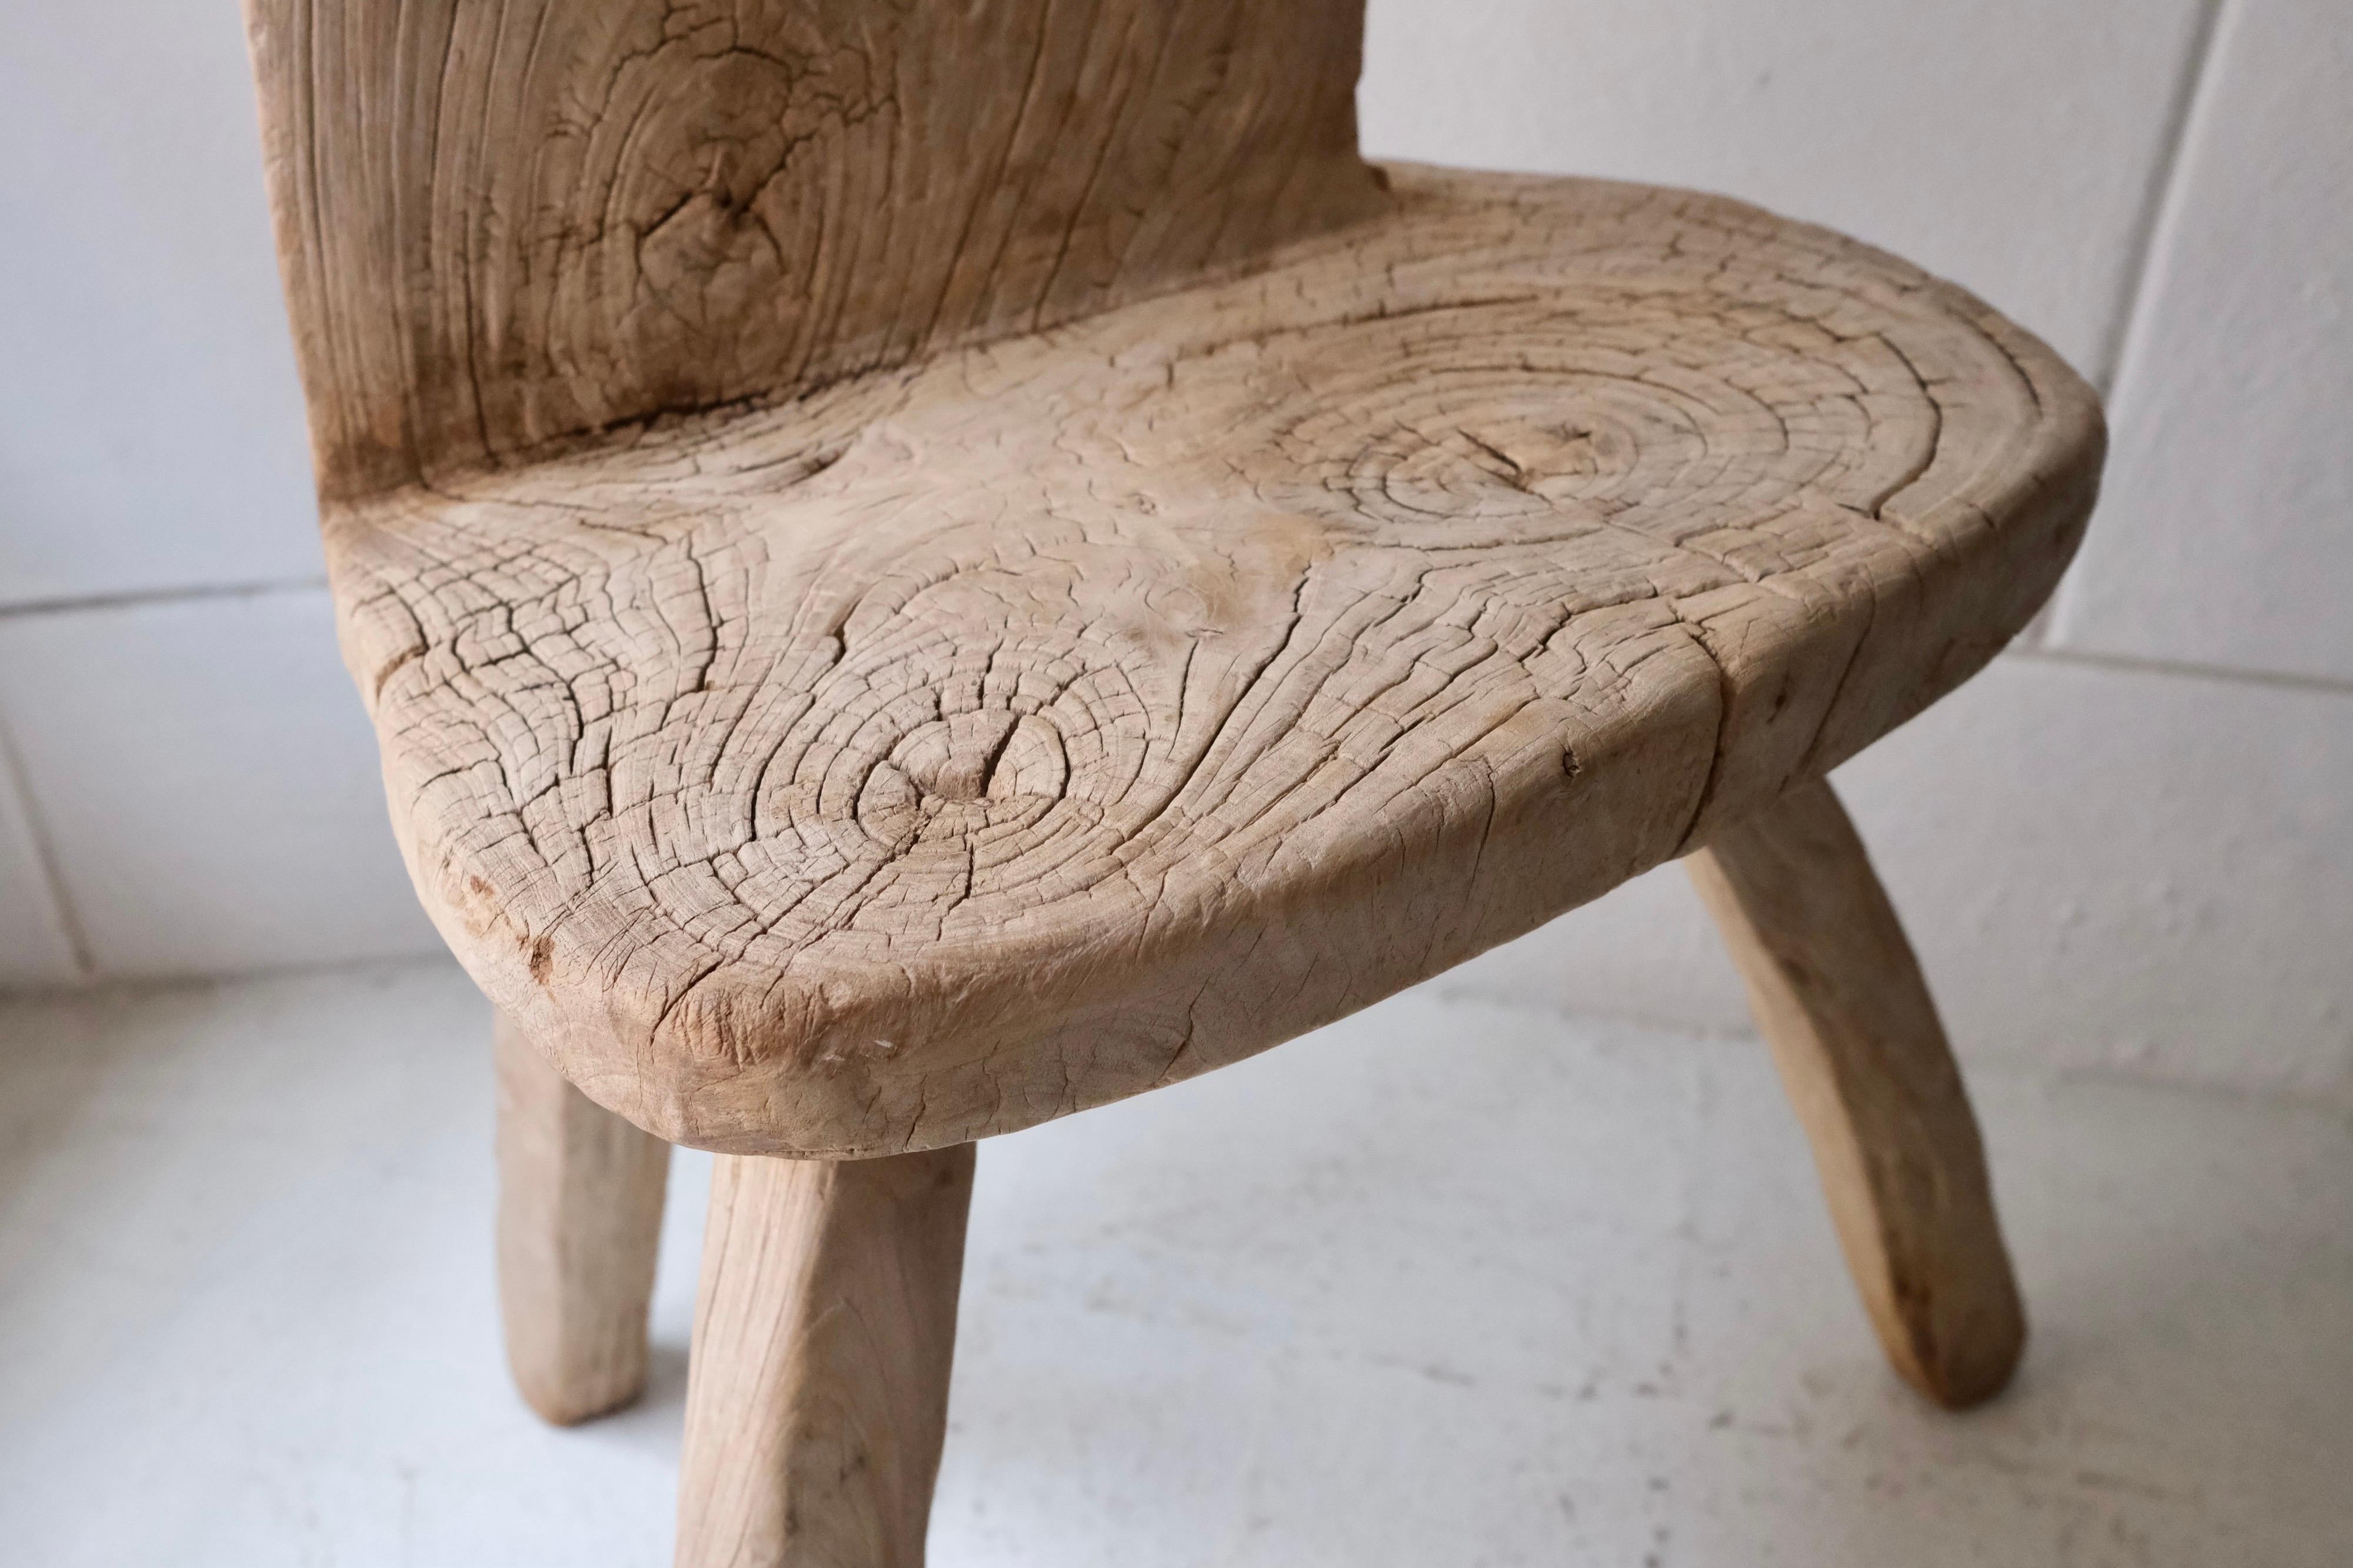 Rustic cedar chair hand carved in one piece, Ticul region, Yucatan, Mexico 1980's. One of a kind workmanship and finish.